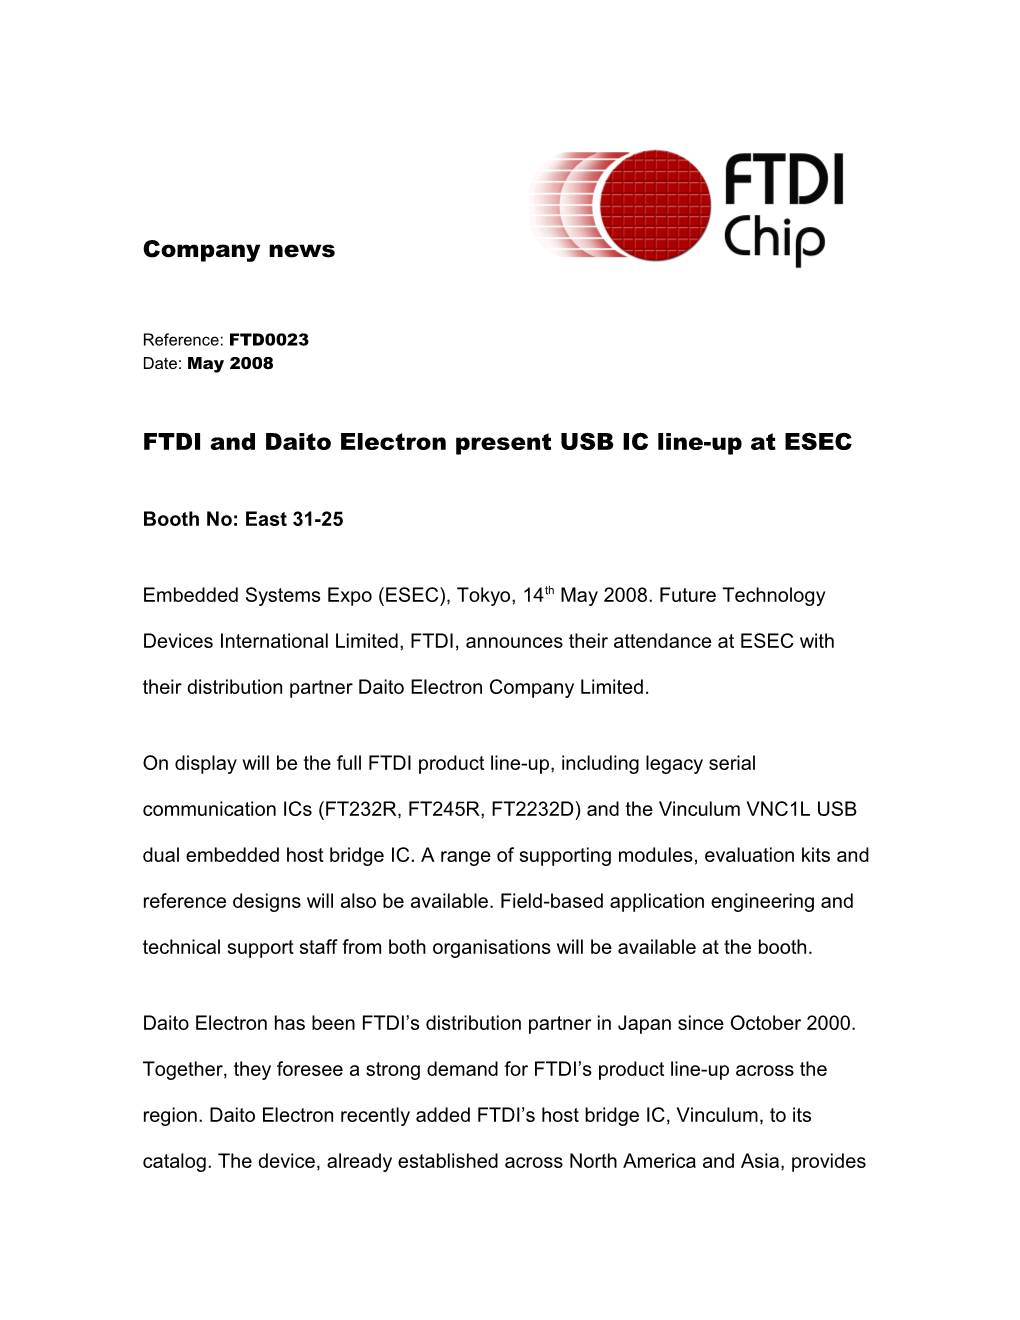 FTDI and Daito Electron Present USB IC Line-Up at ESEC